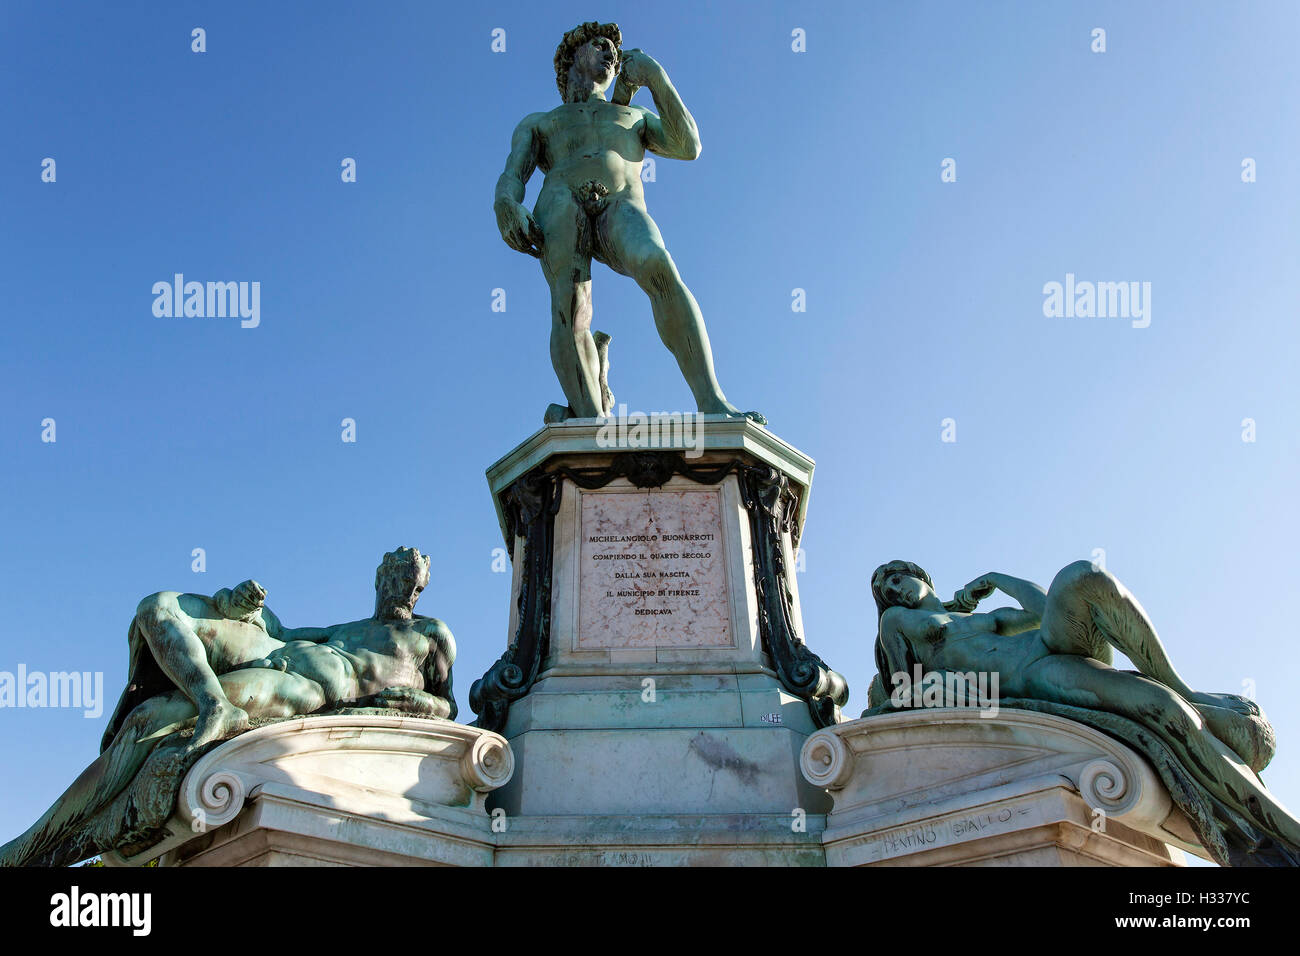 Copy of the Statue of David, Piazzale Michelangelo, Florence, Tuscany, Italy Stock Photo